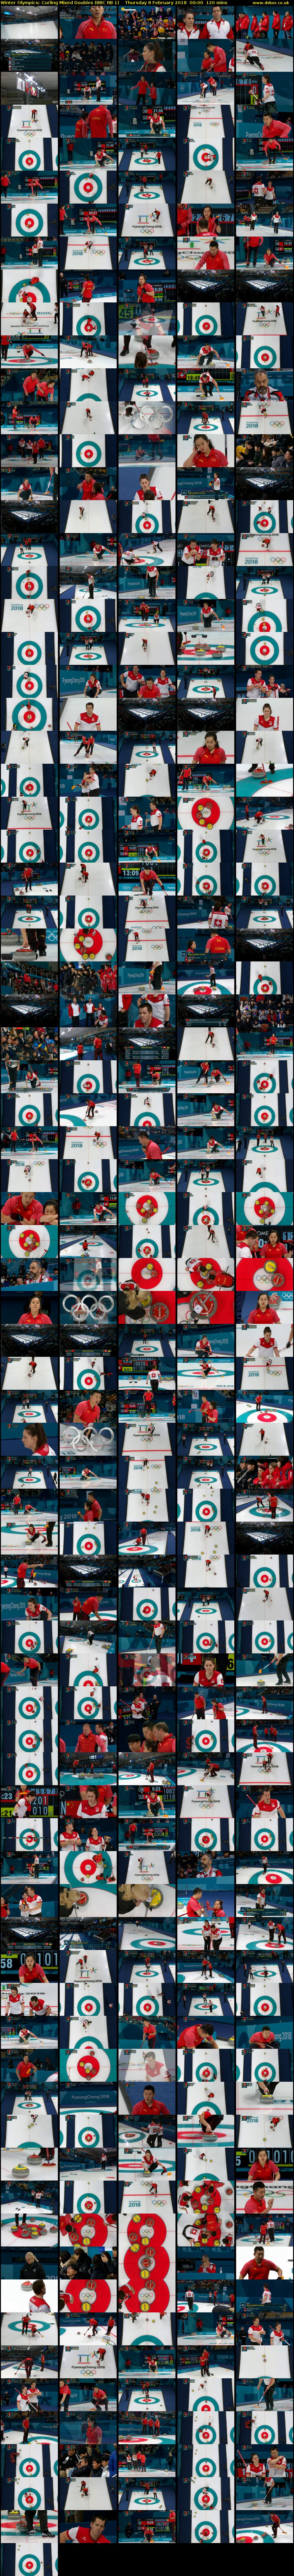 Winter Olympics: Curling Mixed Doubles (BBC RB 1) Thursday 8 February 2018 00:00 - 02:00